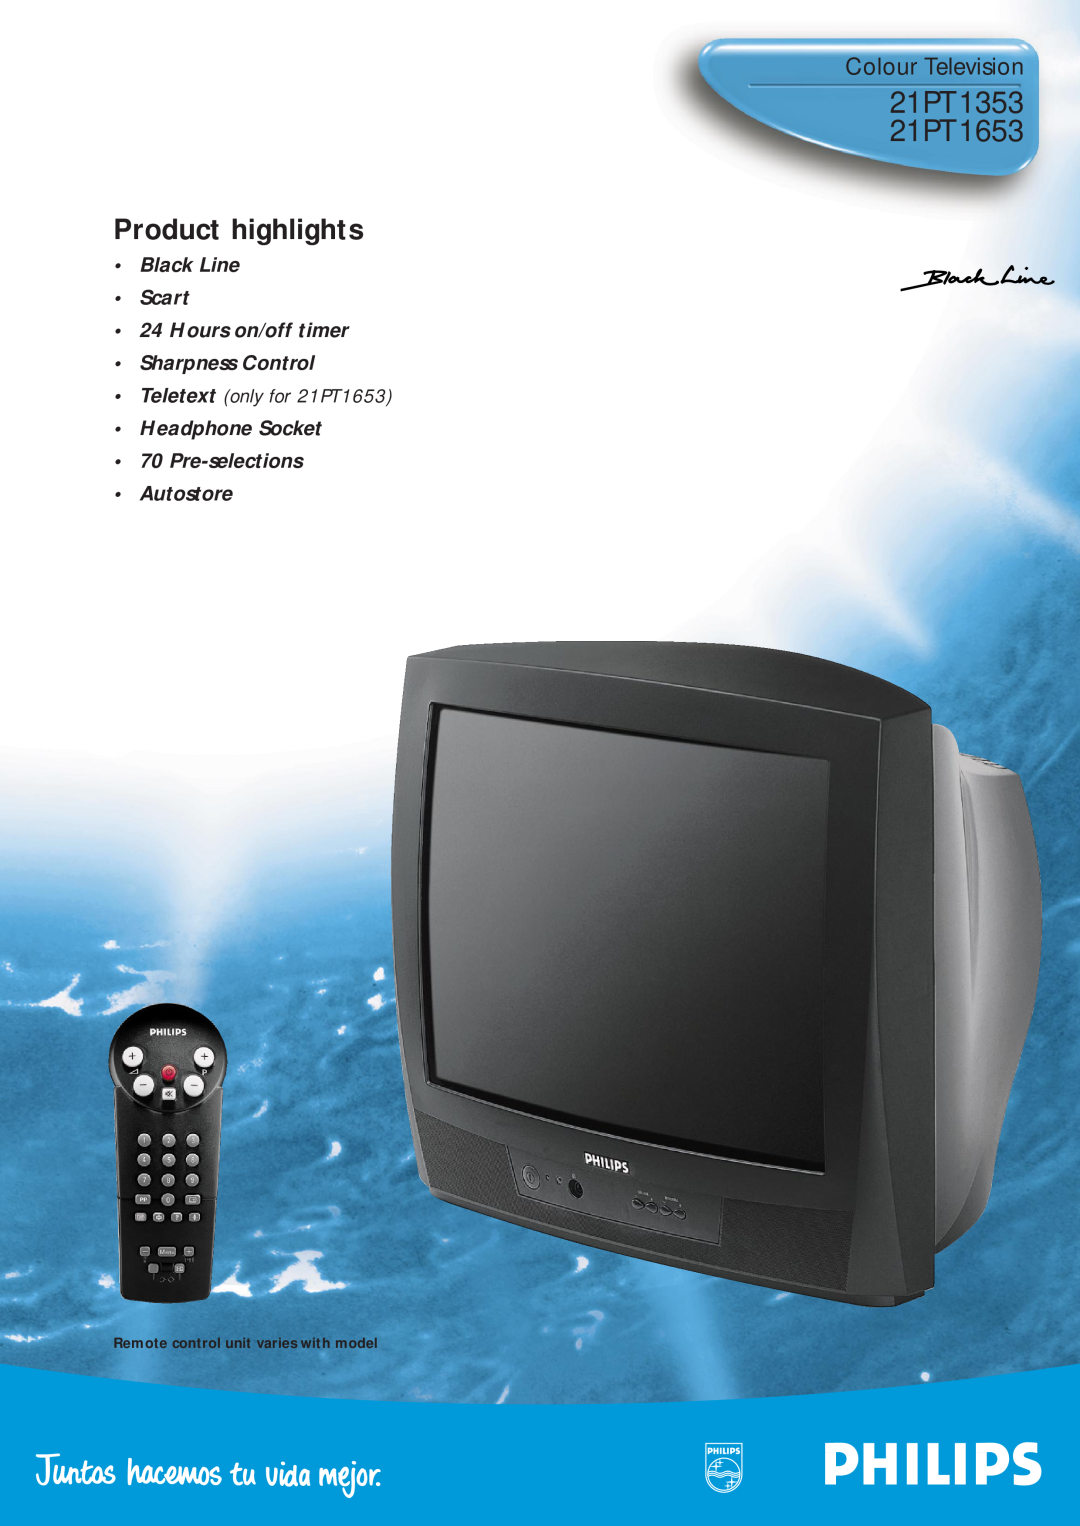 Philips manual 21PT1353 21PT1653, Product highlights, Colour Television, Teletext only for 21PT1653 